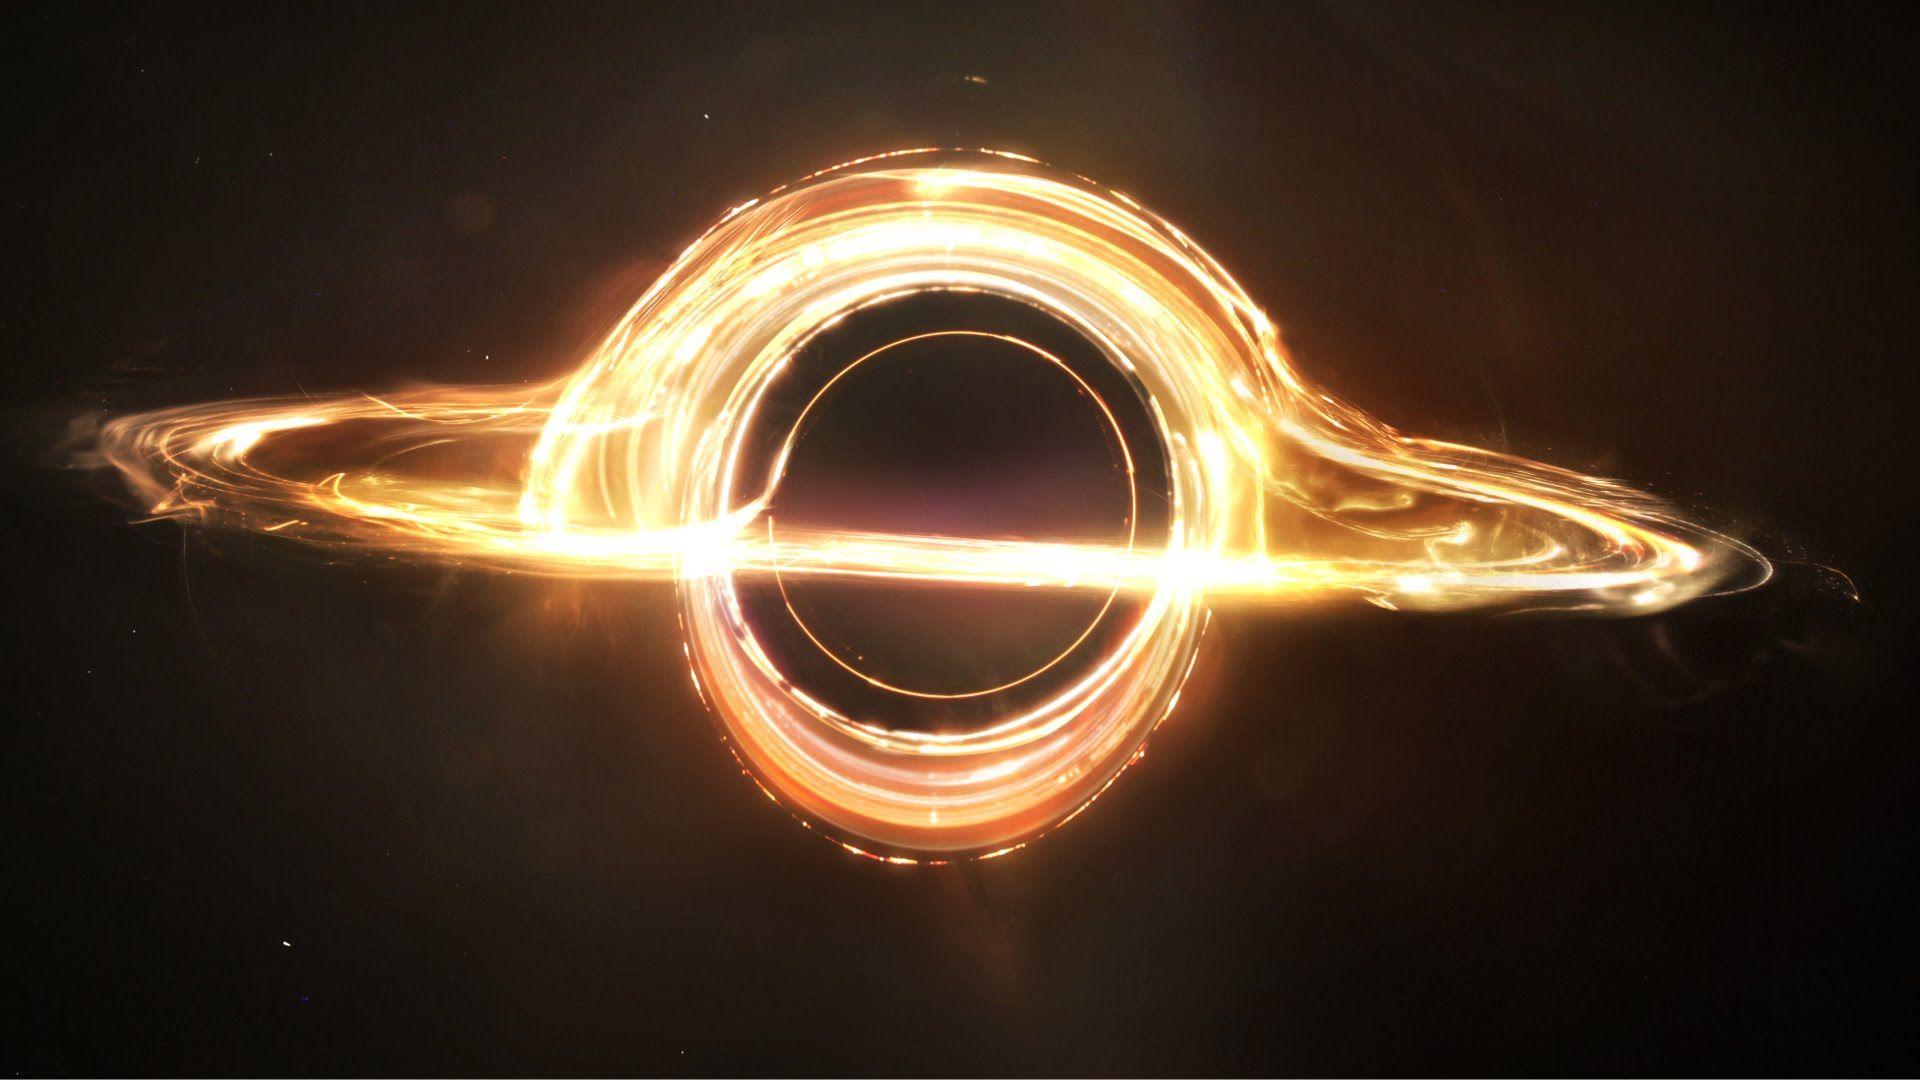 Moving Black Hole Wallpapers - Top Free Moving Black Hole Backgrounds